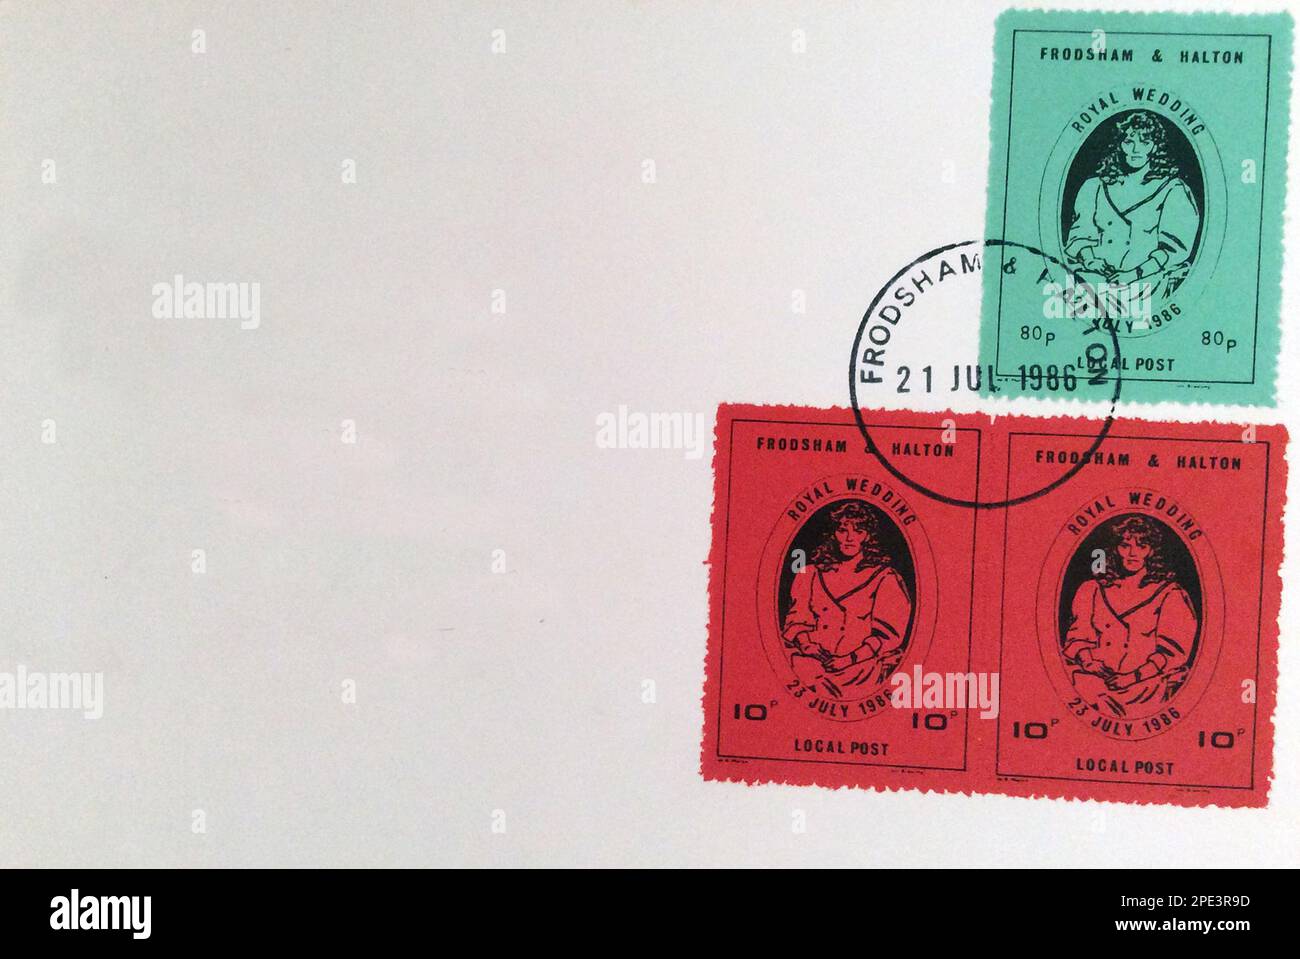 First Day Cover (FDC) for Frodsham & Halton local post 21st July 1996 celebrating the royal wedding of Prince Andrew & Sarah Ferguson, philately stamp Stock Photo